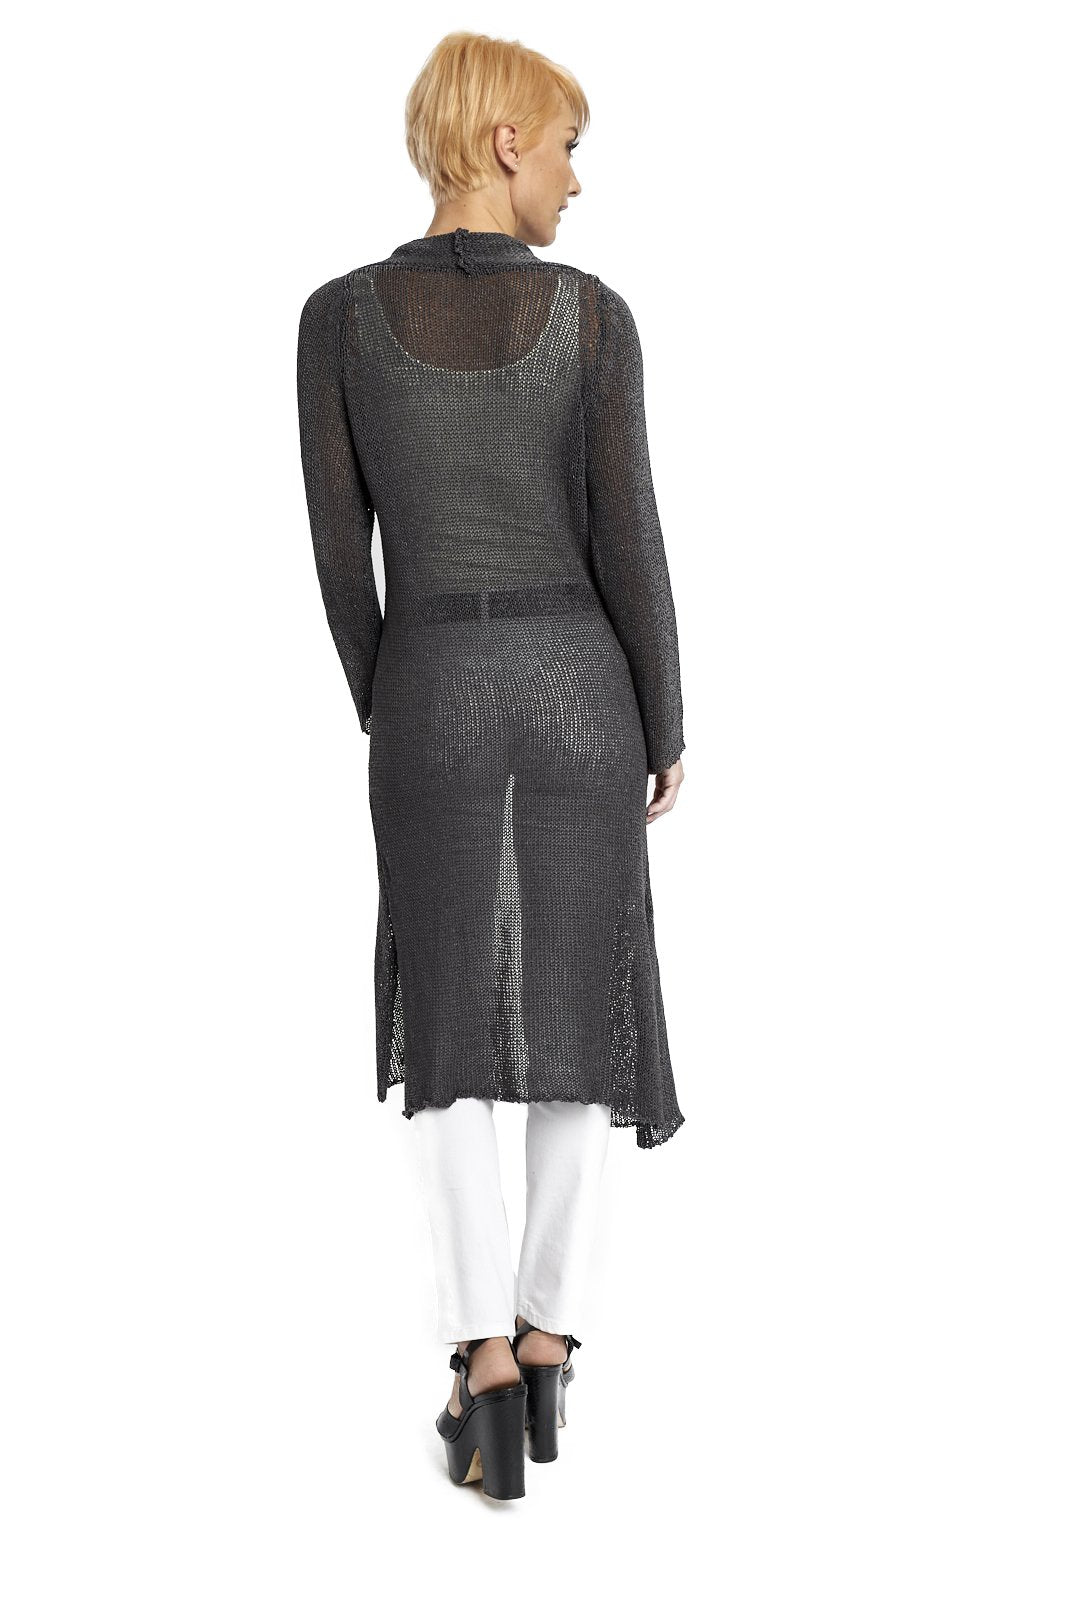 Women's Knit Duster, Slits and Pockets